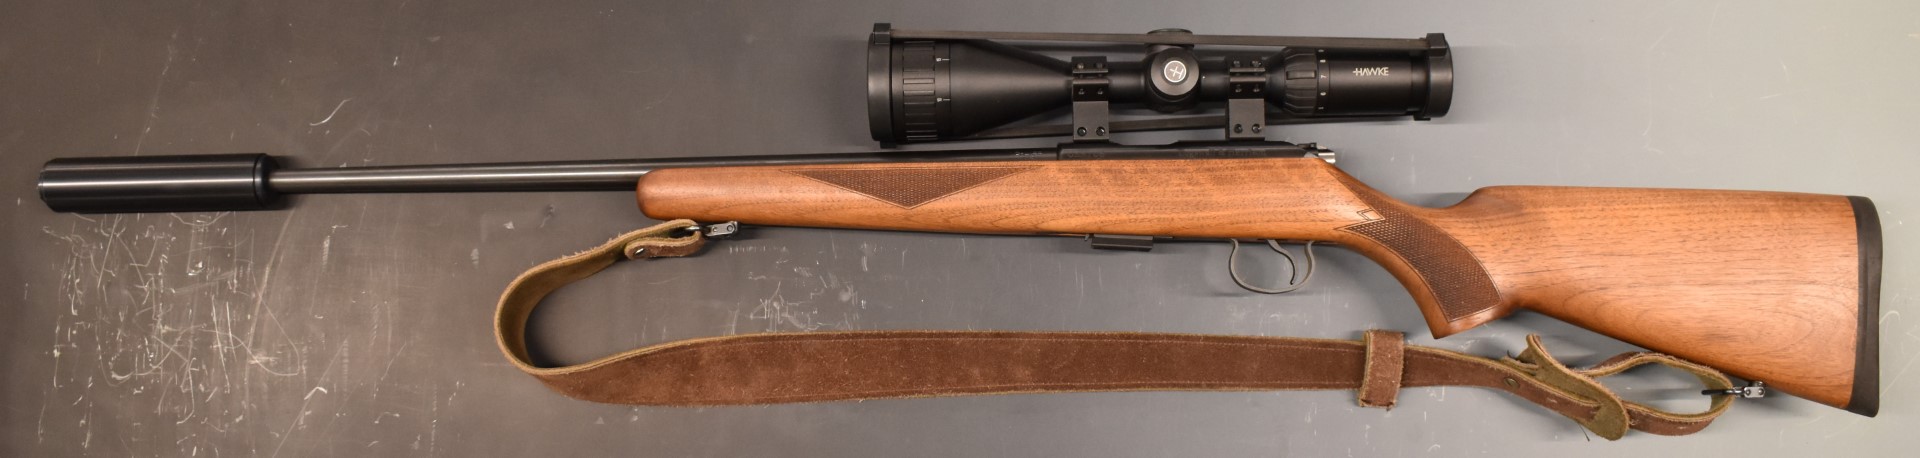 Cogswell & Harrison Certus .22LR semi-automatic rifle with chequered grip and forend, leather sling, - Image 3 of 3